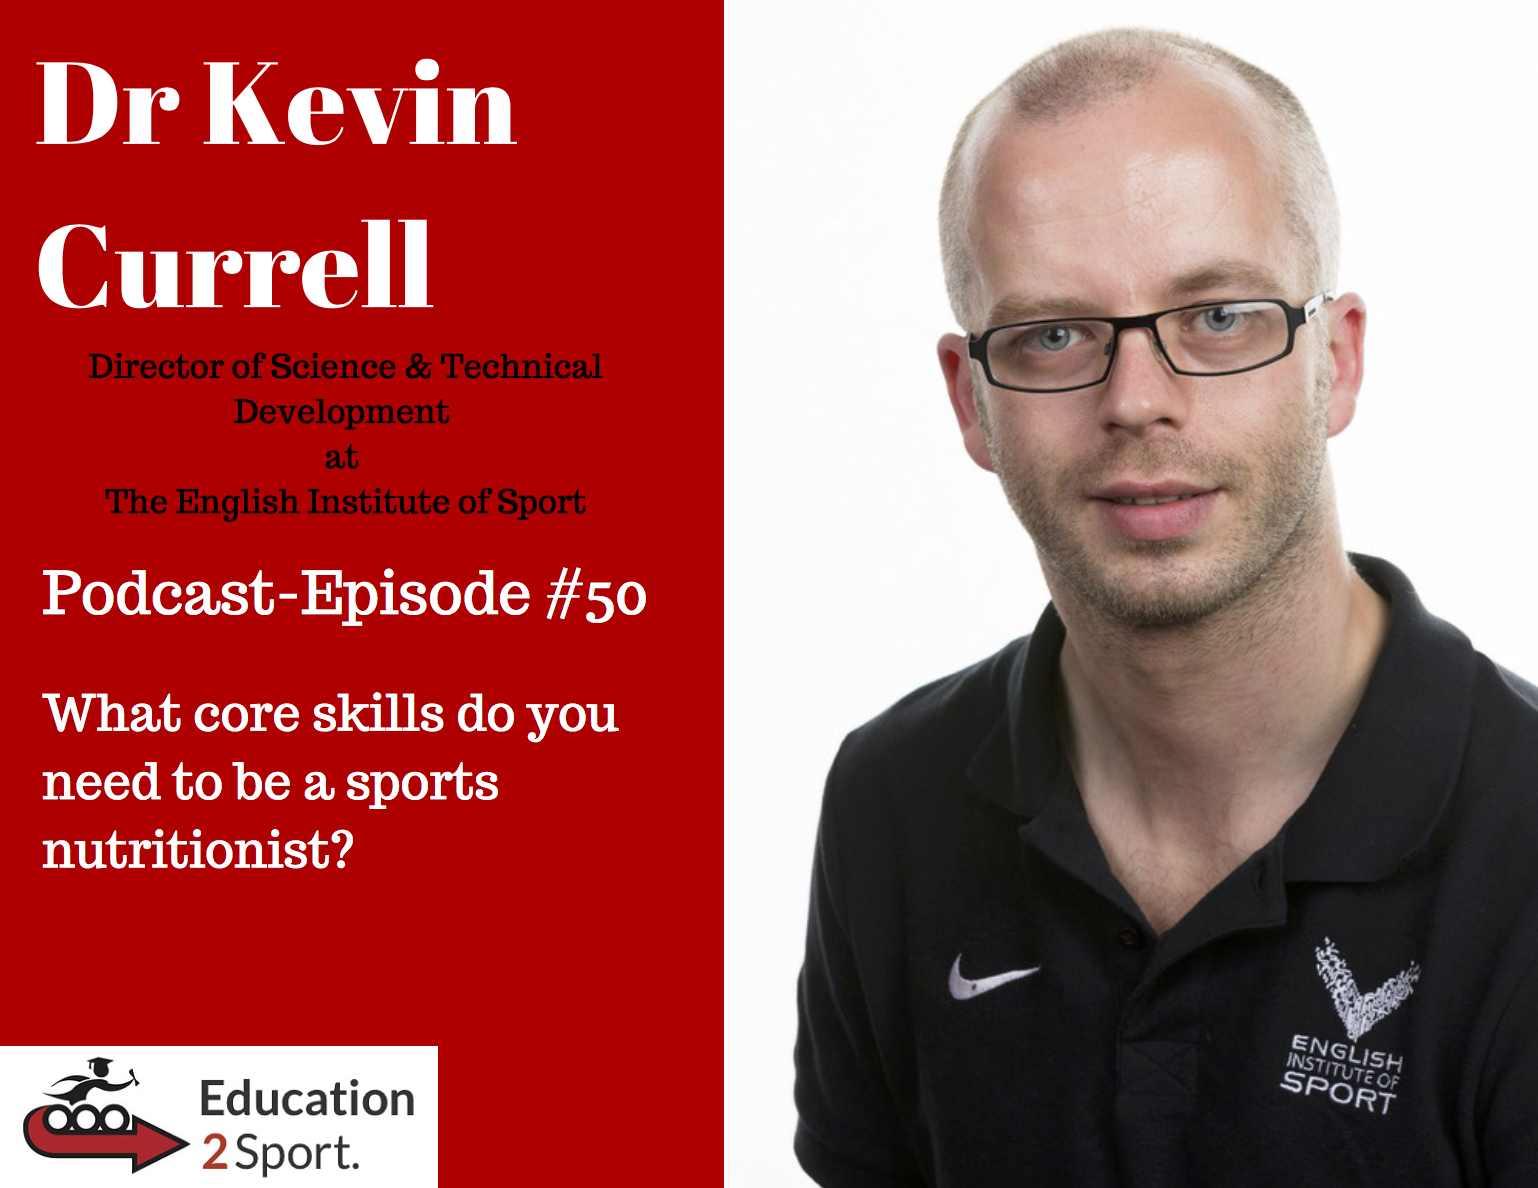 Dr Kevin Currell